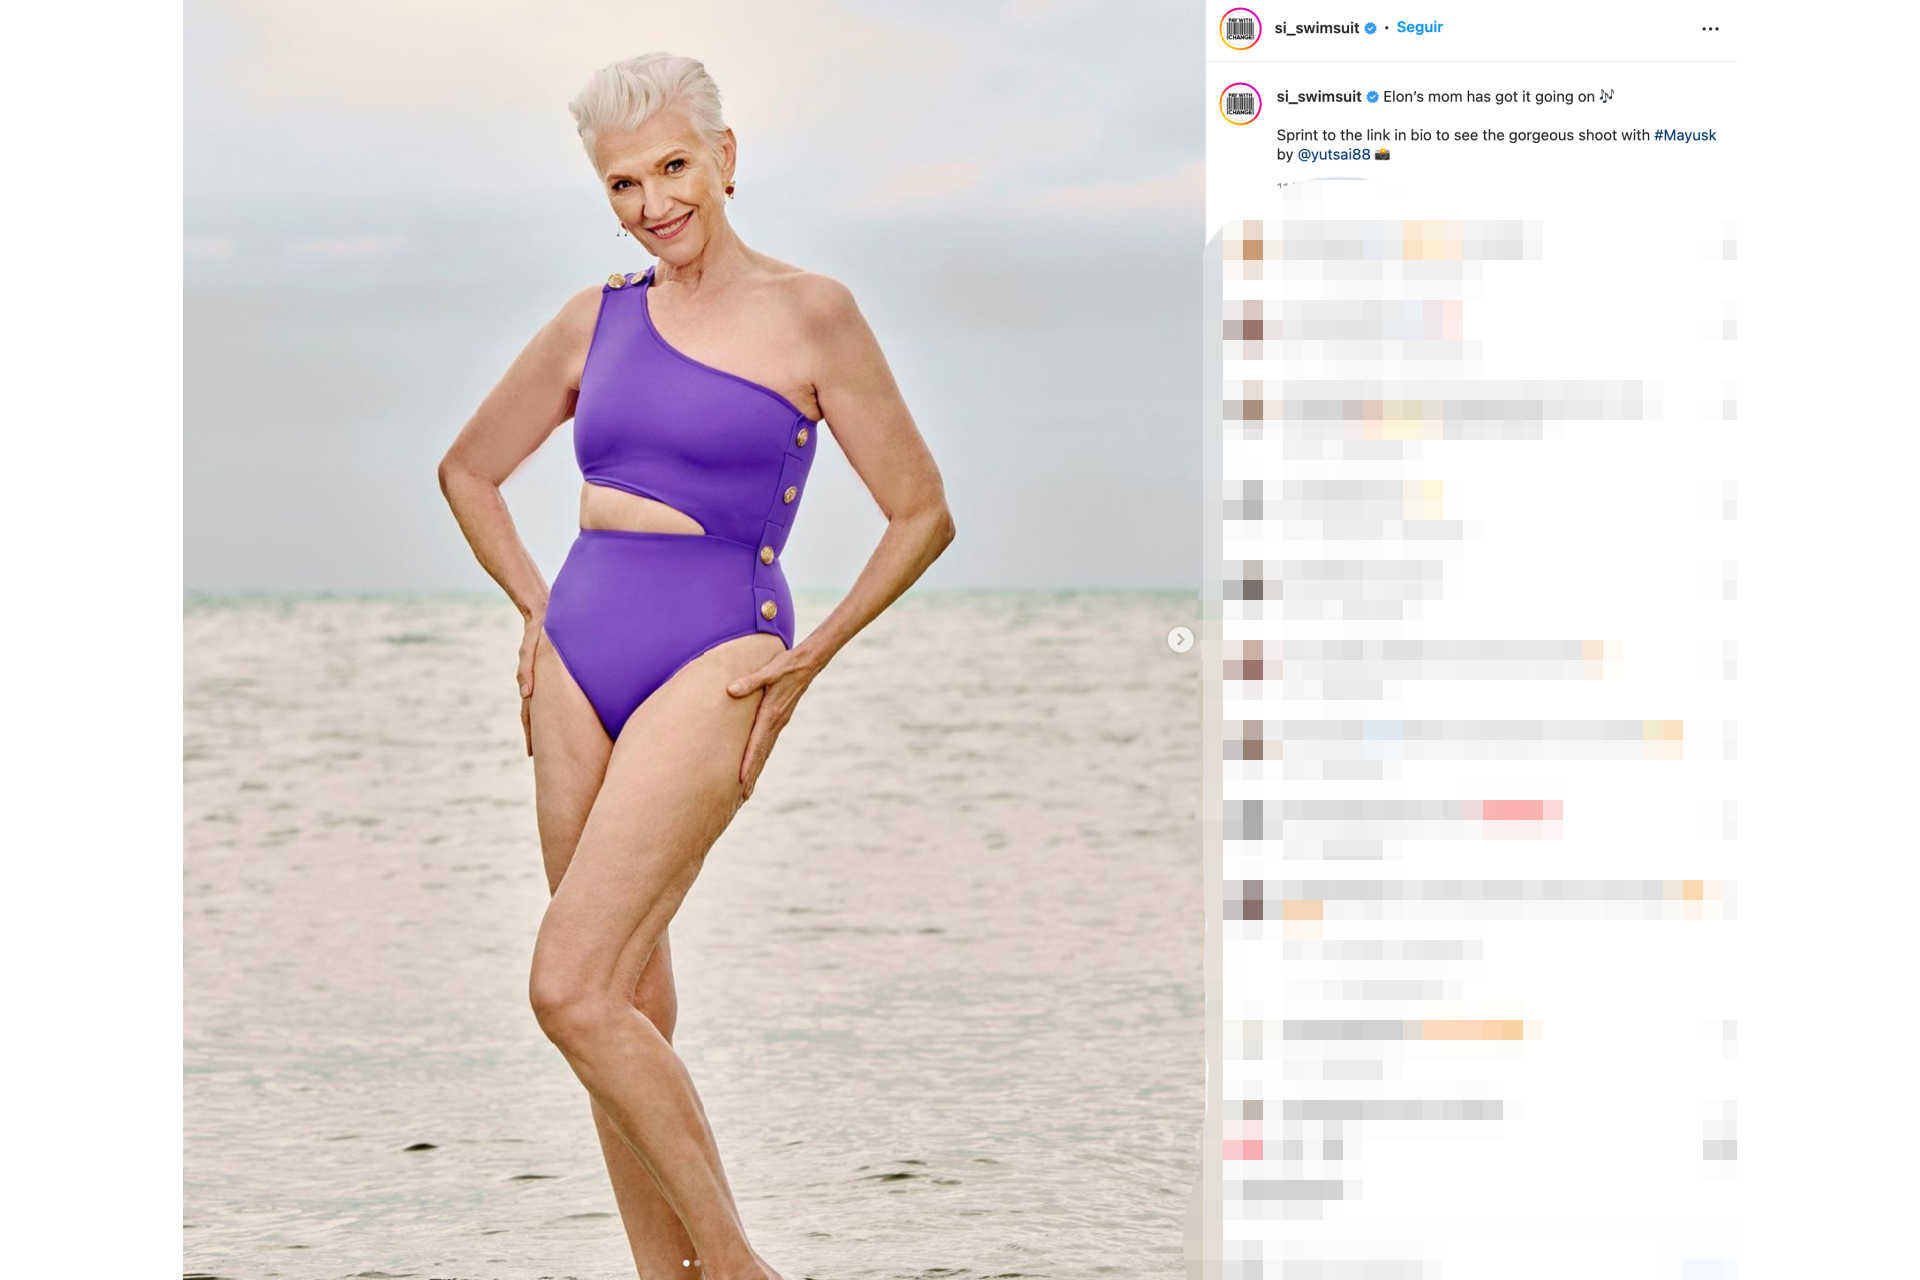 <p>"I am very excited to be on the cover of the SI Swimsuit at 74 years old," she said. "It's about time!"</p> <p>Photo: Instagram - @si_swimsuit</p>